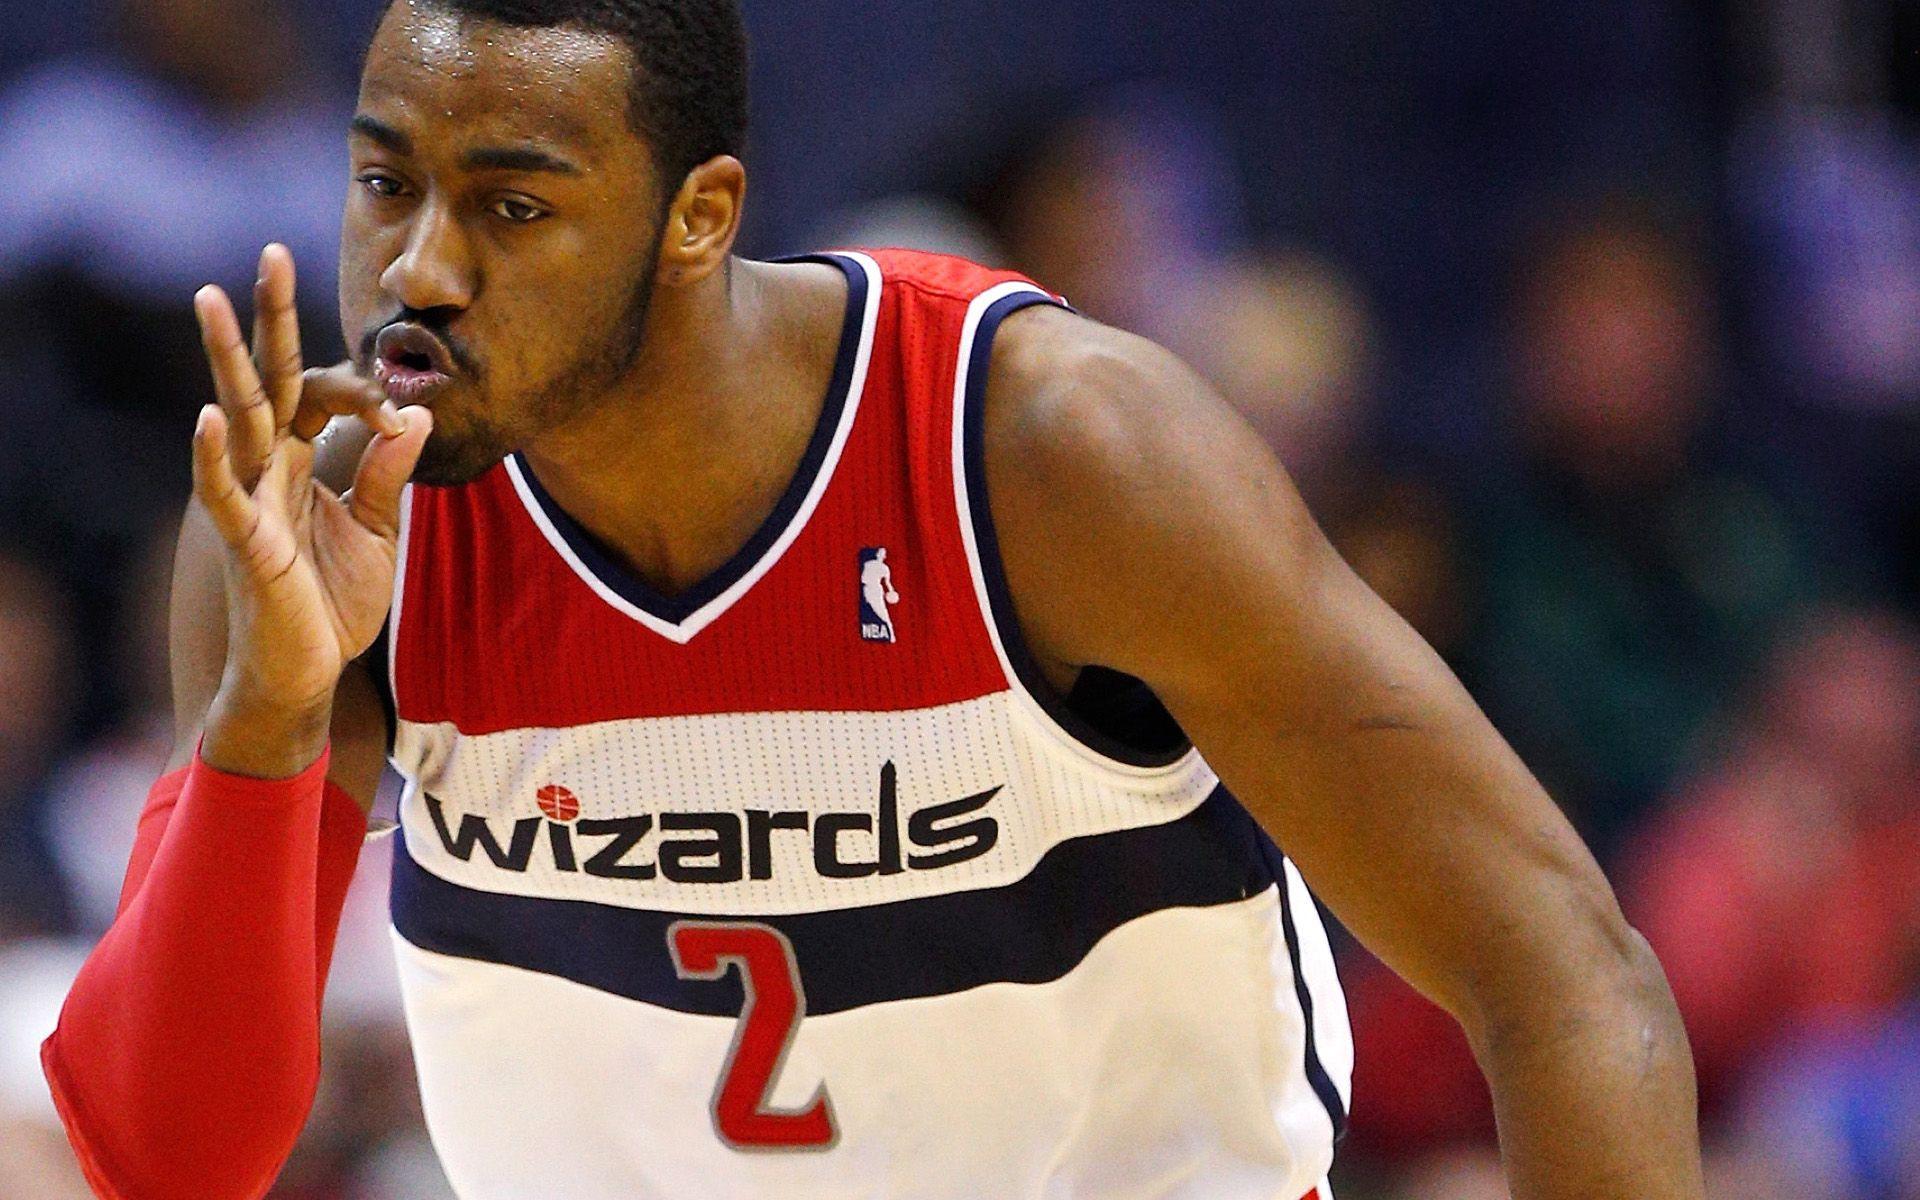 John Wall Wallpaper High Resolution and Quality Download